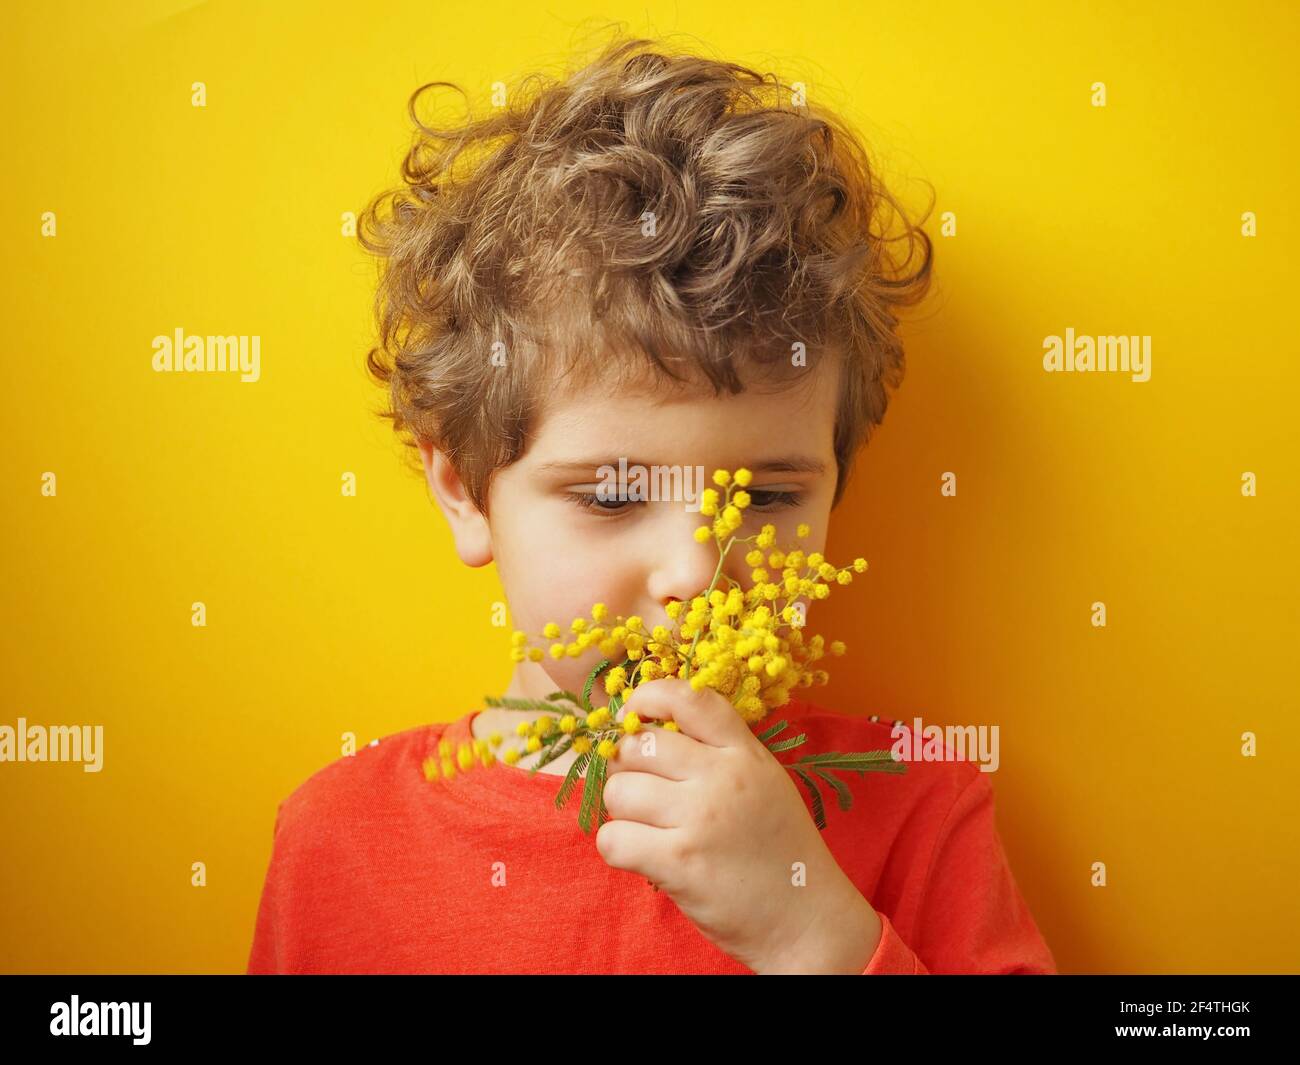 Cute little boy holding a mimosa branch in his hands and sniffing it Stock Photo